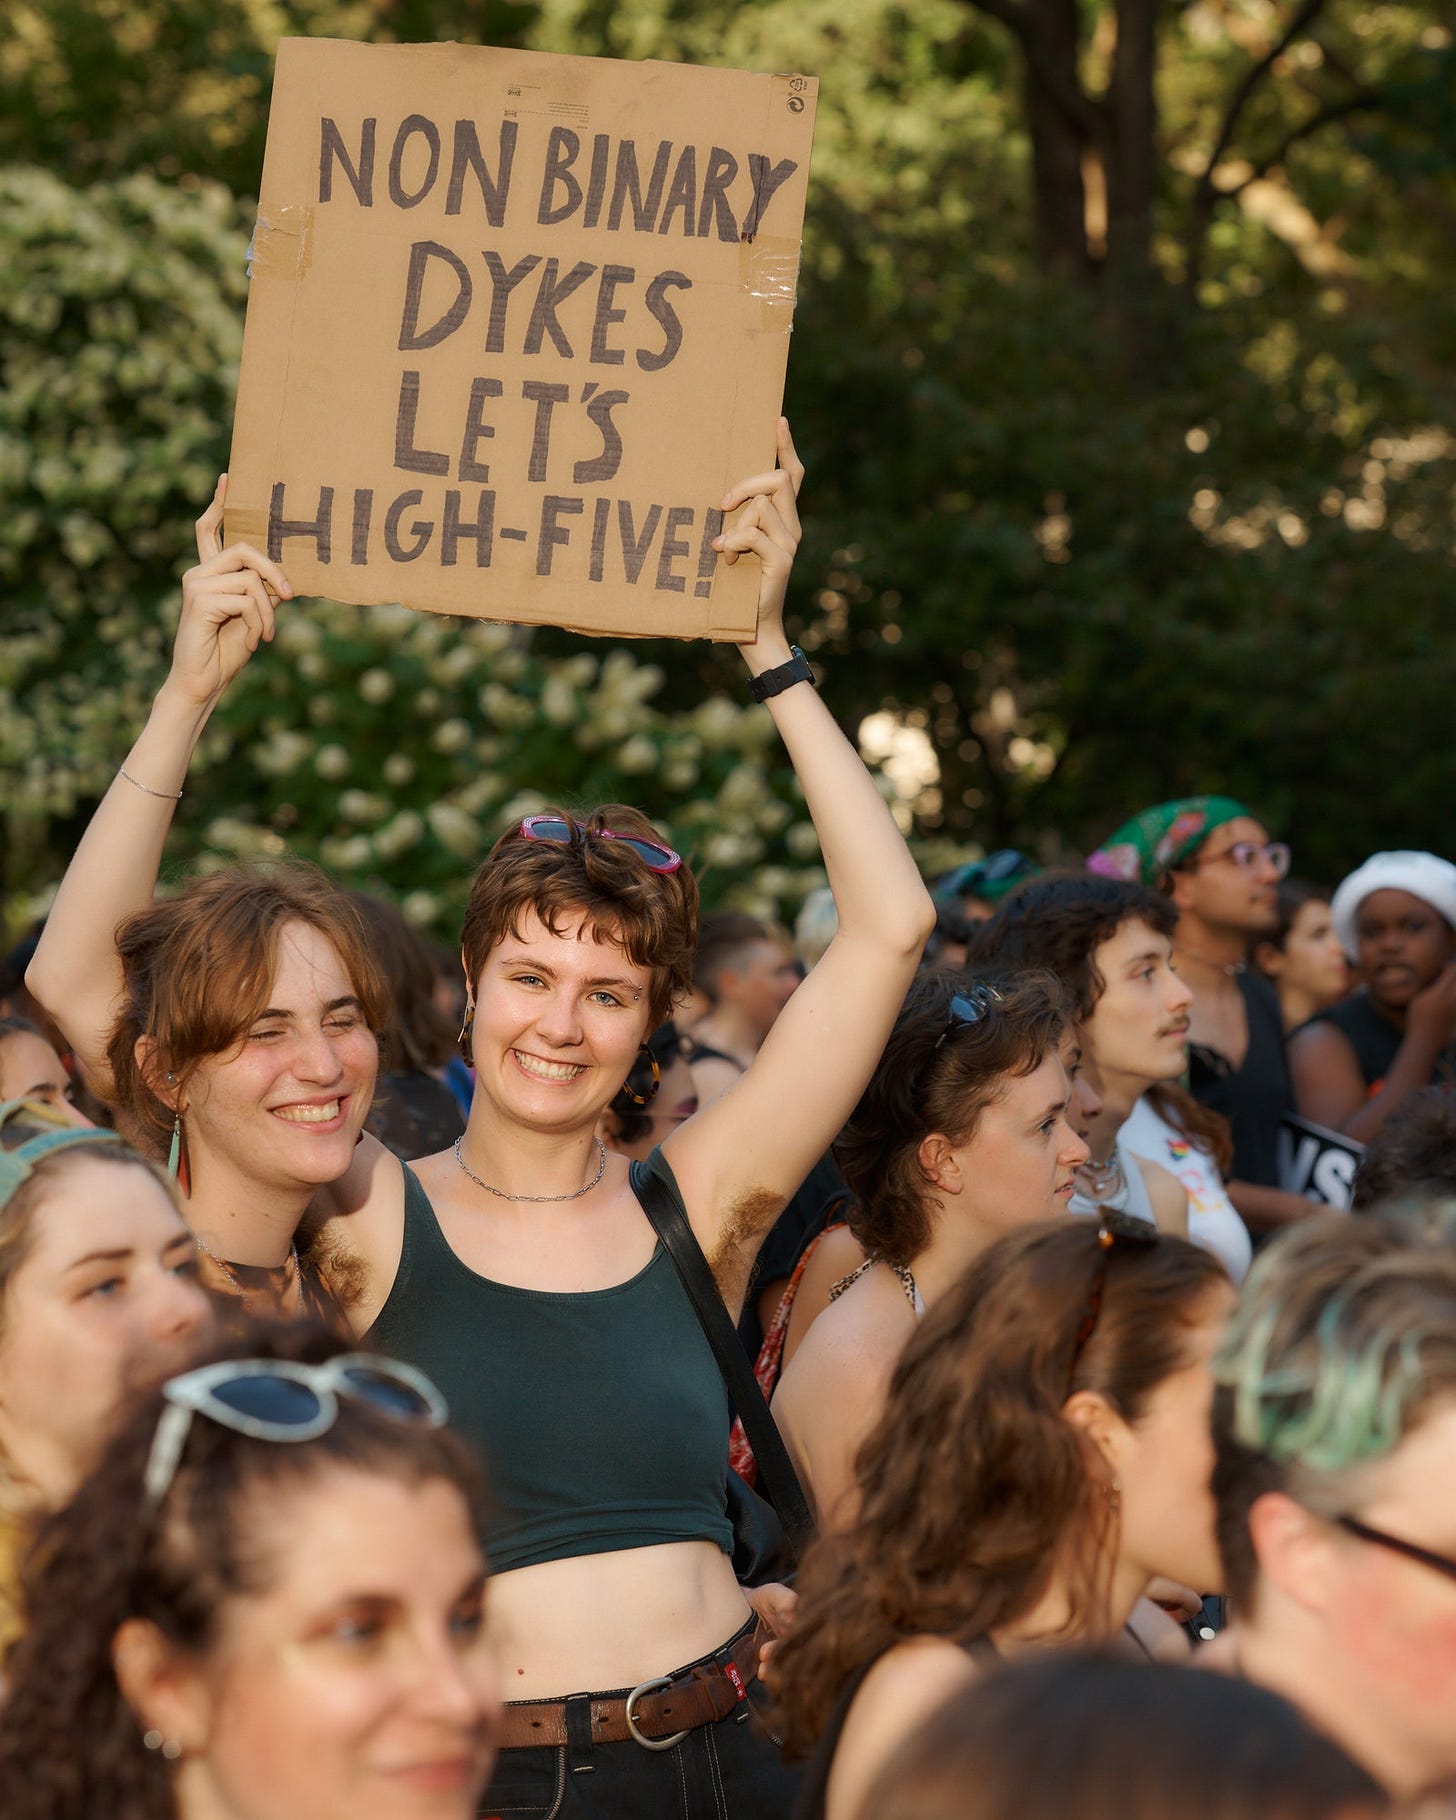 Sign: Nonbinary Dykes, let's high five by Yael Malka